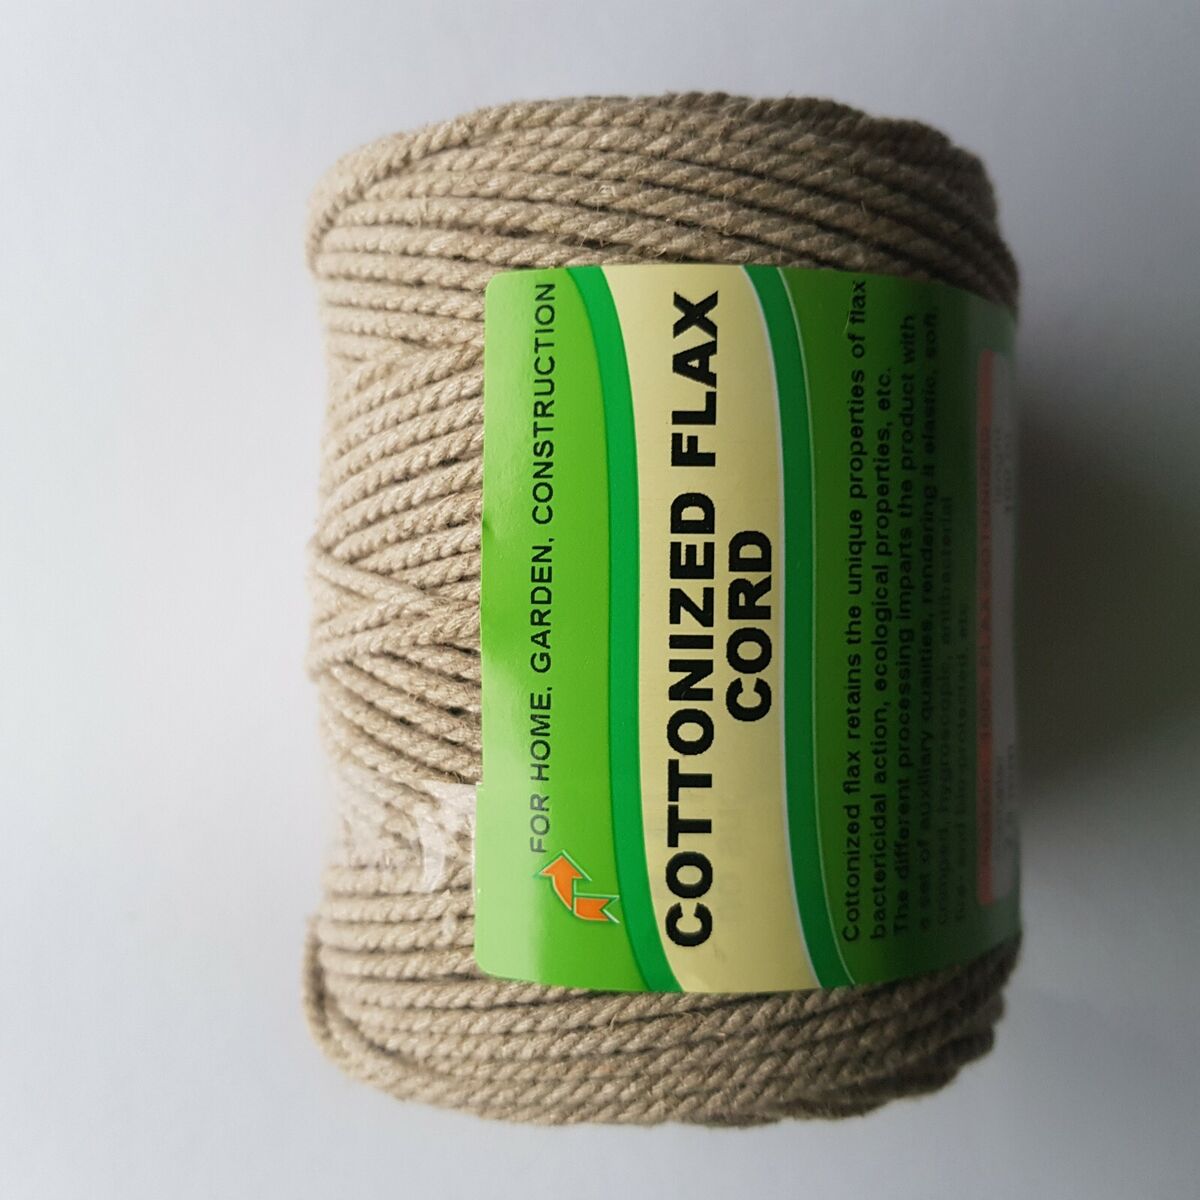 Linen&Cotton Cord 2.5 mm/100 m of High Quality Yarn for Crafts Macrame  Projects